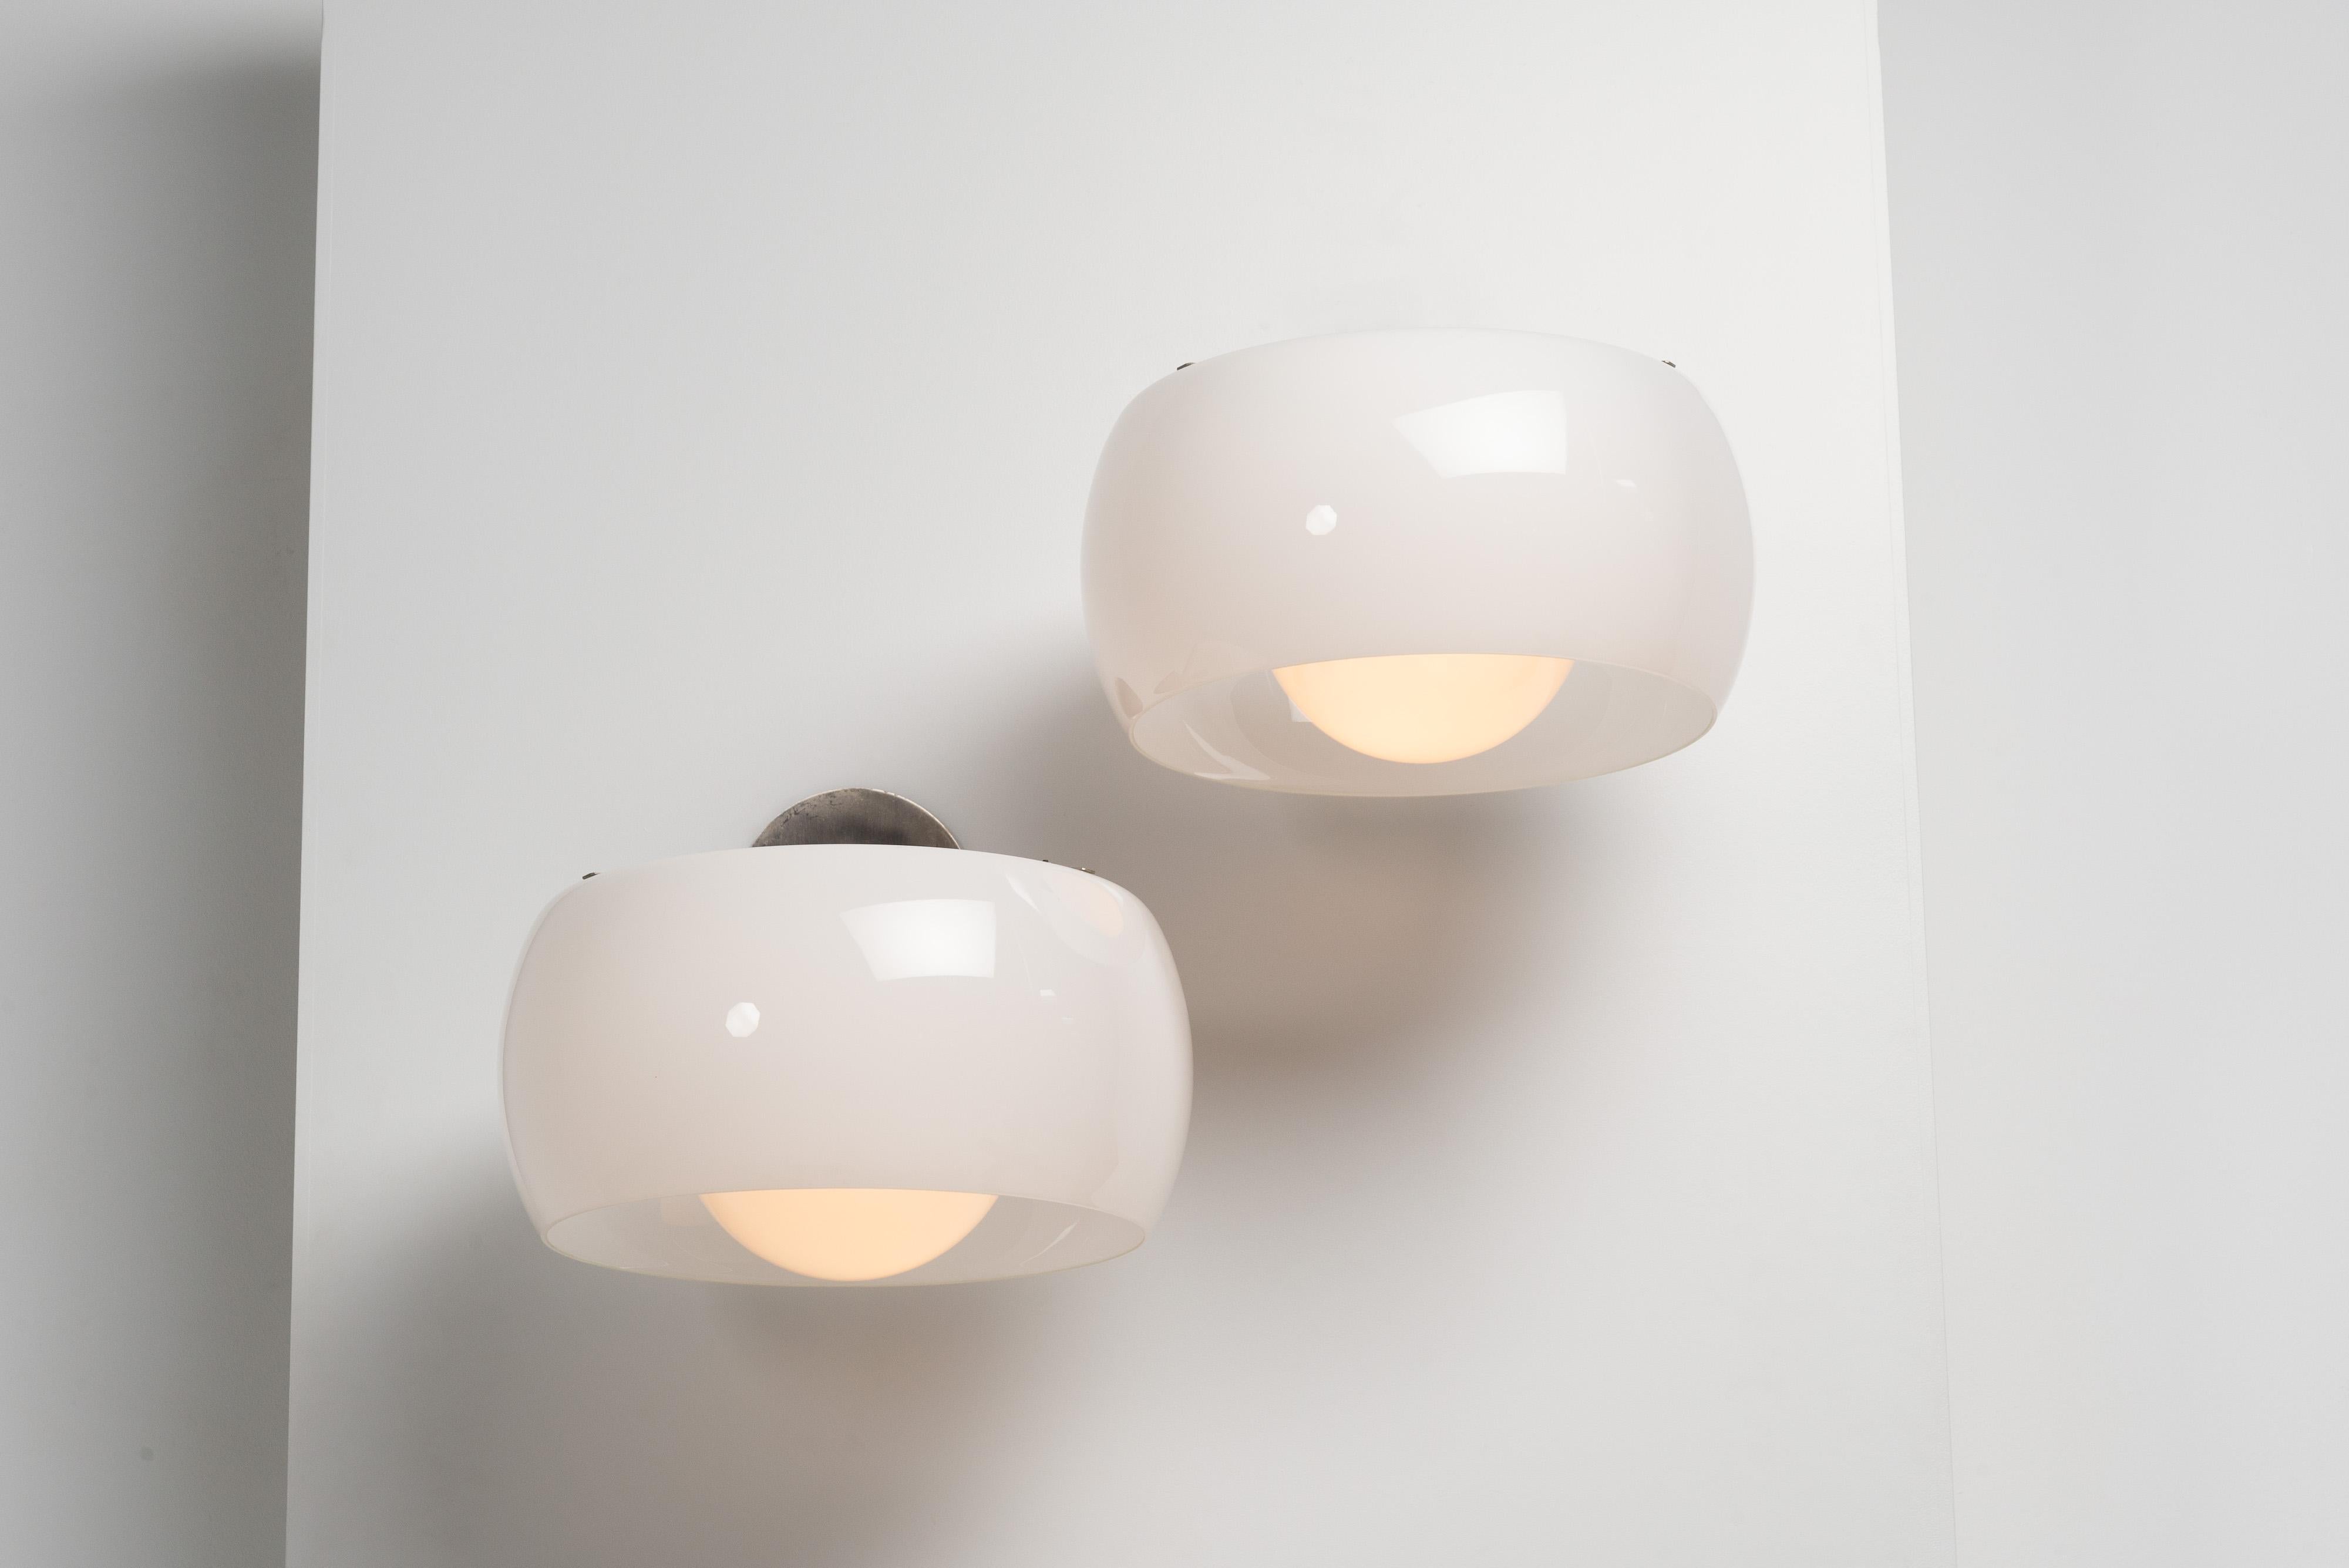 Vico Magistretti Clinio wall lamps Artemide Italy 1967 In Good Condition For Sale In Roosendaal, Noord Brabant